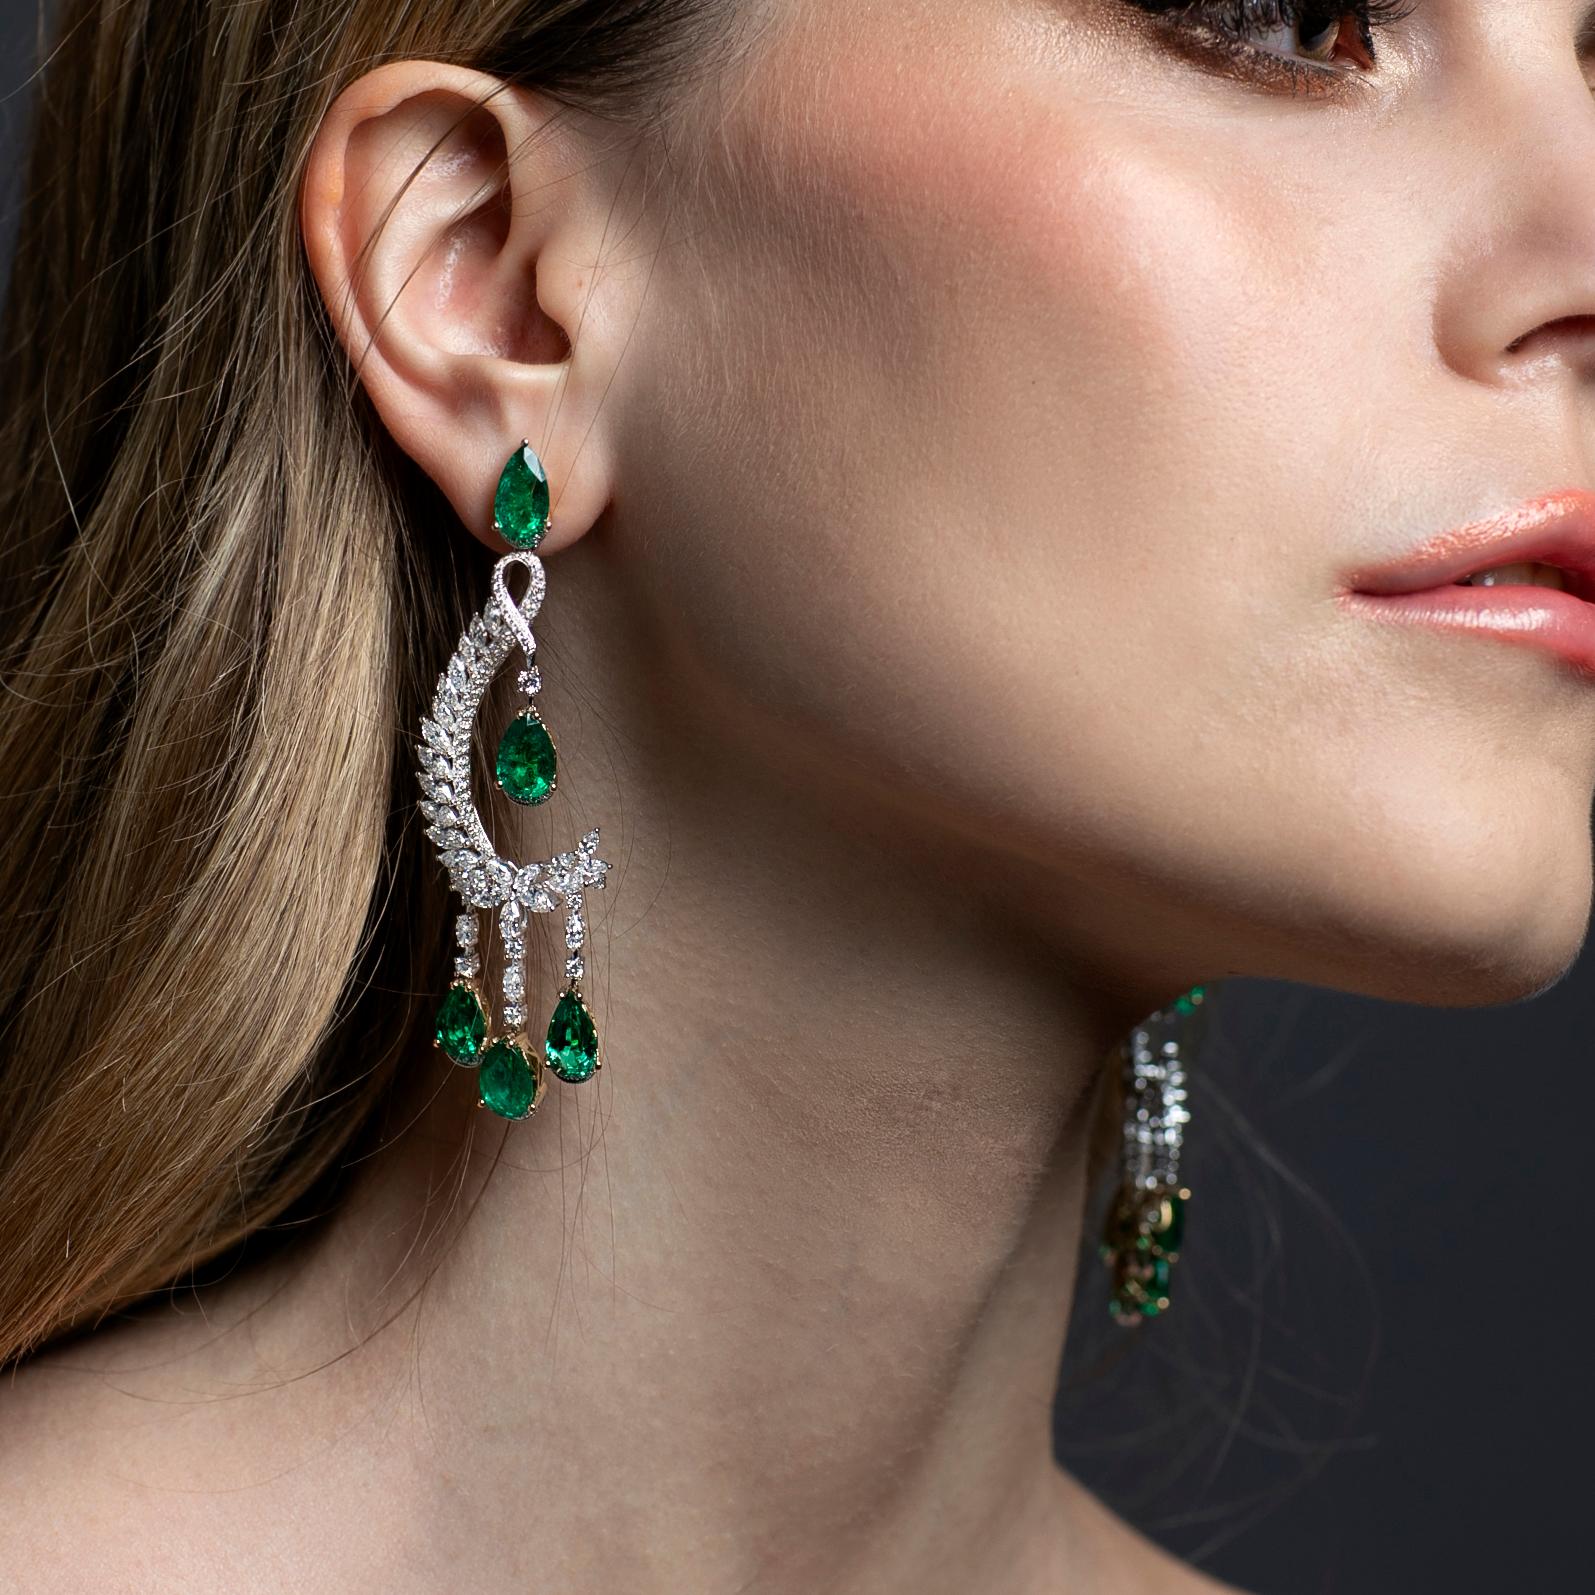 Regalia Collection - This collection is an ode to the magnificence which adorns the outfits of royals and evening gowns of Hollywood celebrities. Featuring the finest emeralds with diamonds, this collection is timeless and can pass through